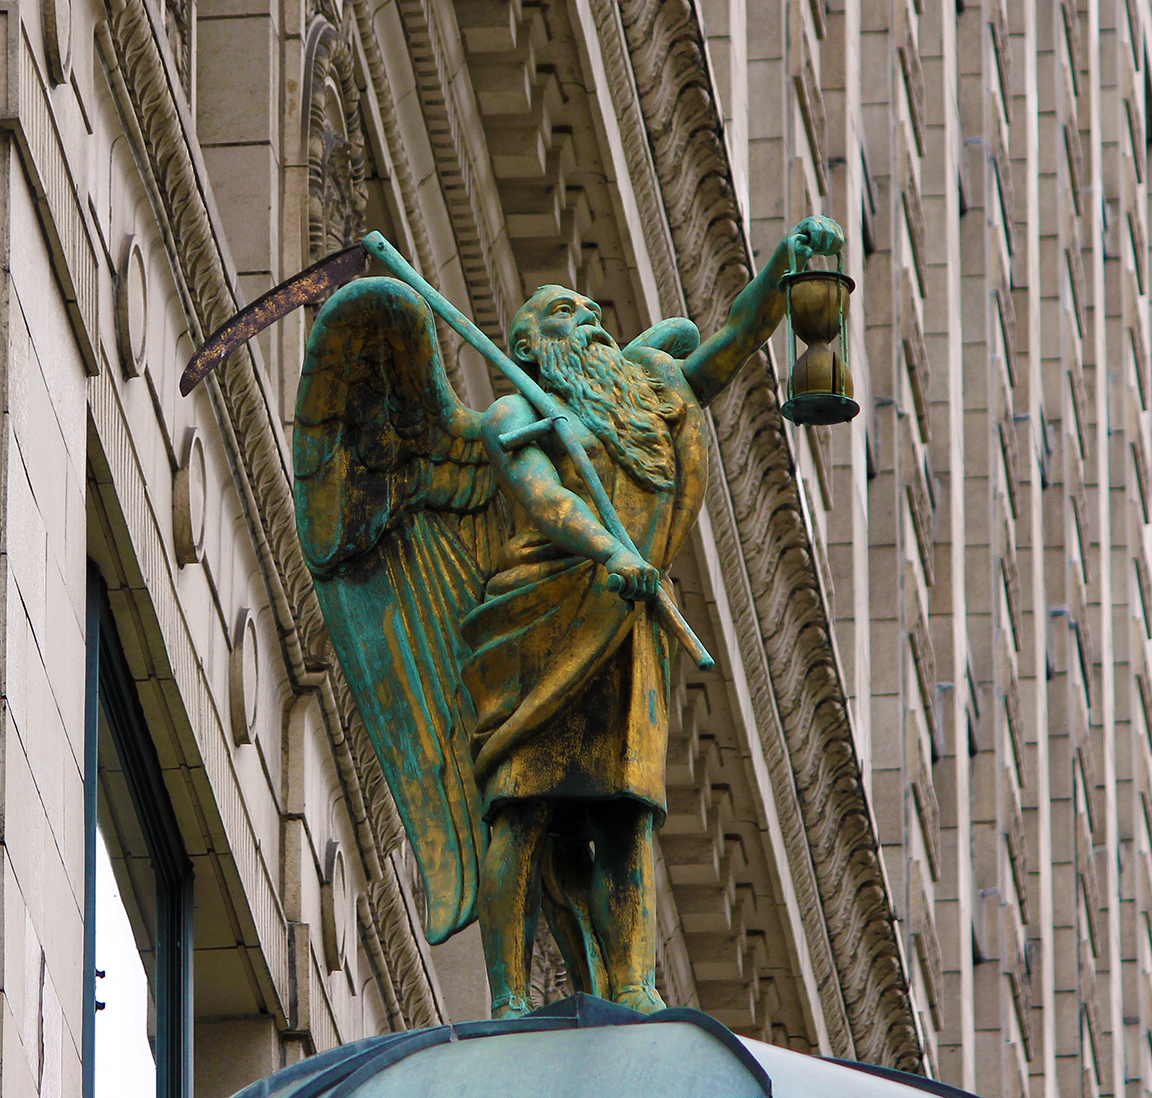 Father Time block at Jewelers Building in Chicago